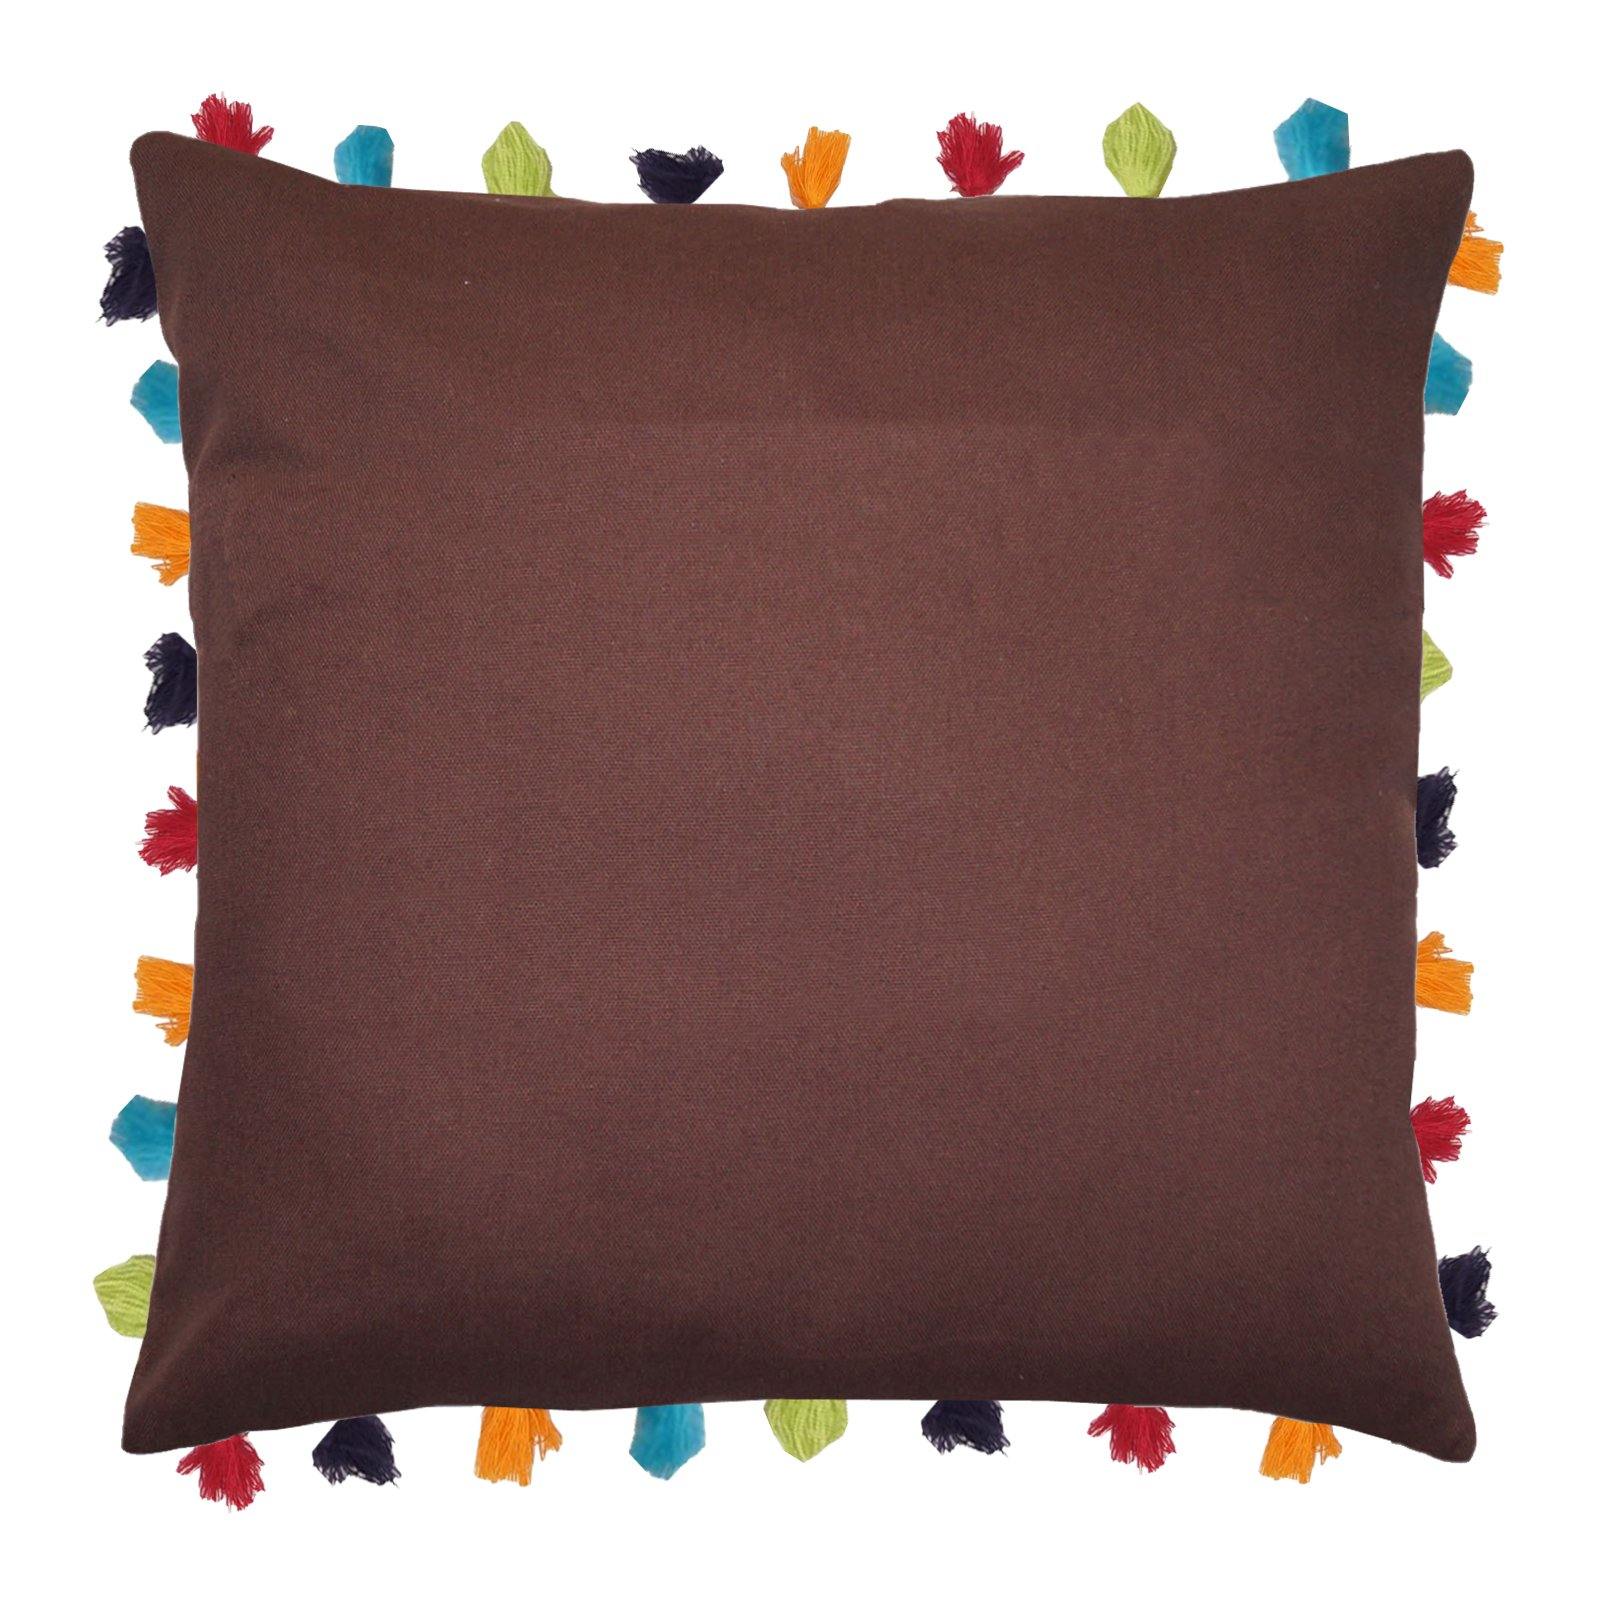 Lushomes French Roast Cushion Cover with Colorful tassels (Single pc, 24 x 24”) - Lushomes